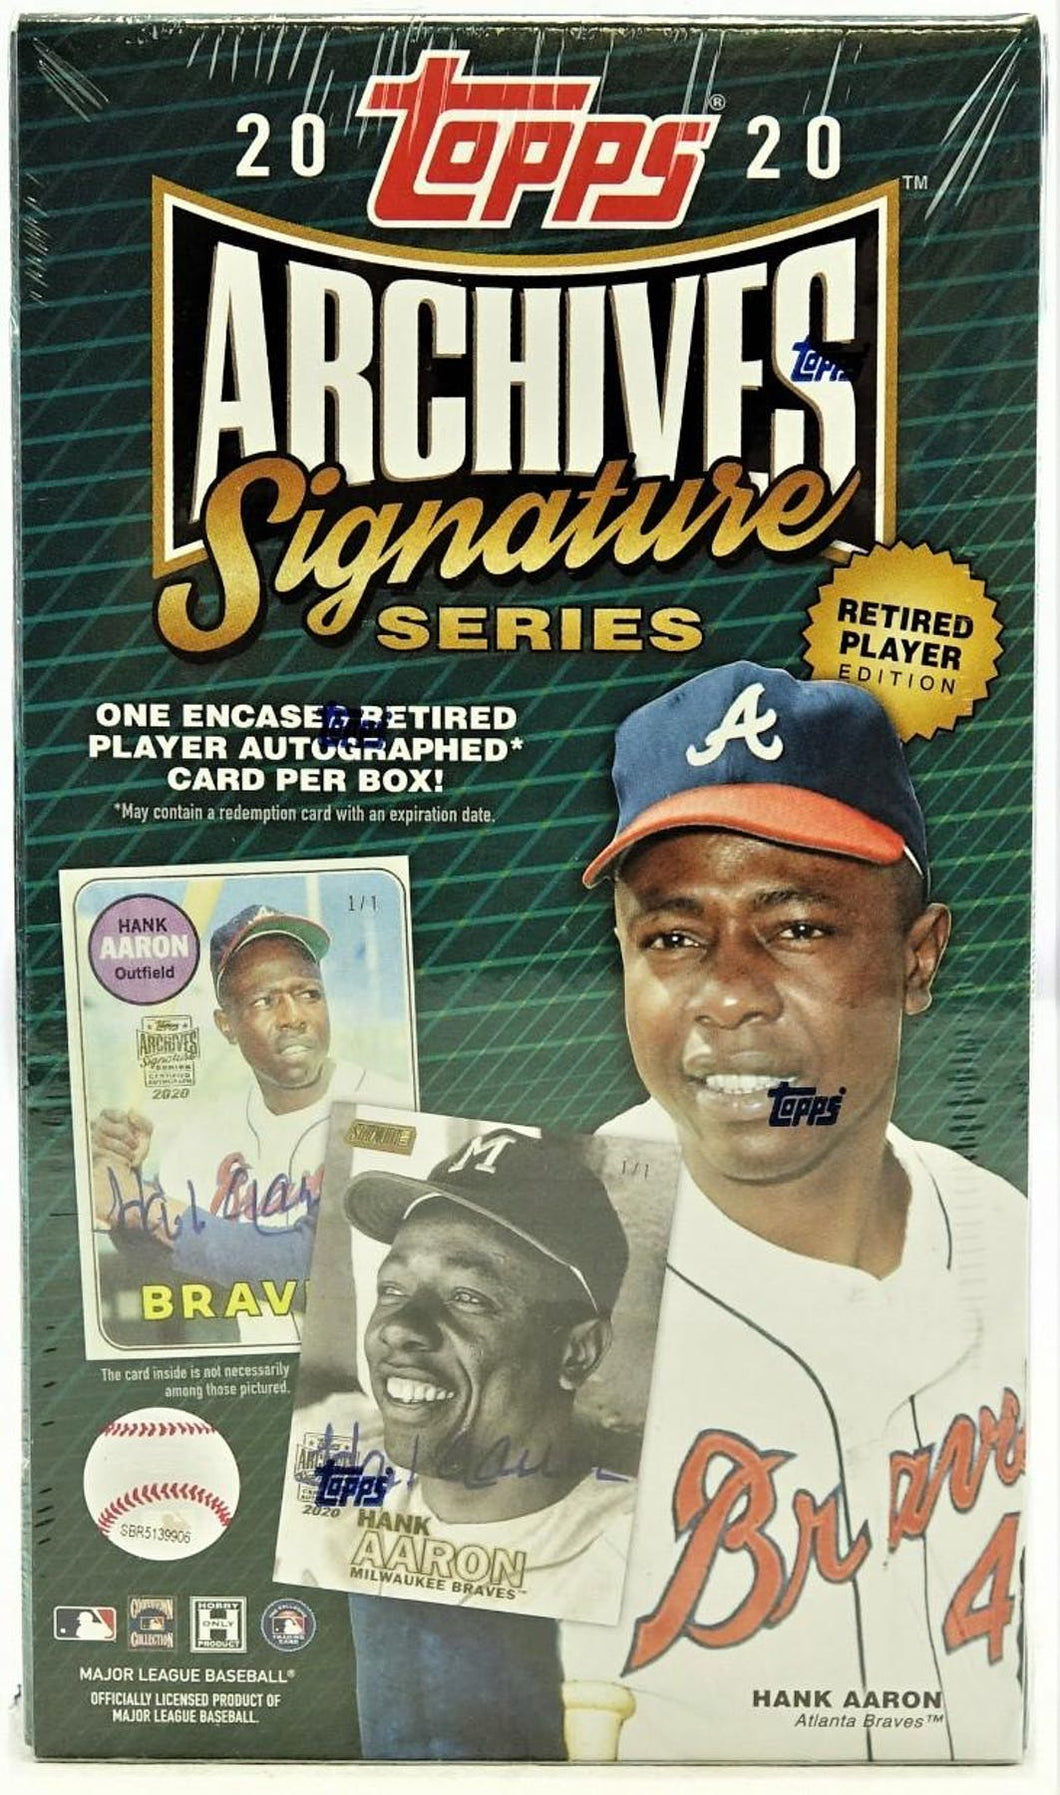 2020 TOPPS ARCHIVES SIGNATURE SERIES RETIRED PLAYER EDITION BASEBALL CARDS (1) RANDOM TEAM #20